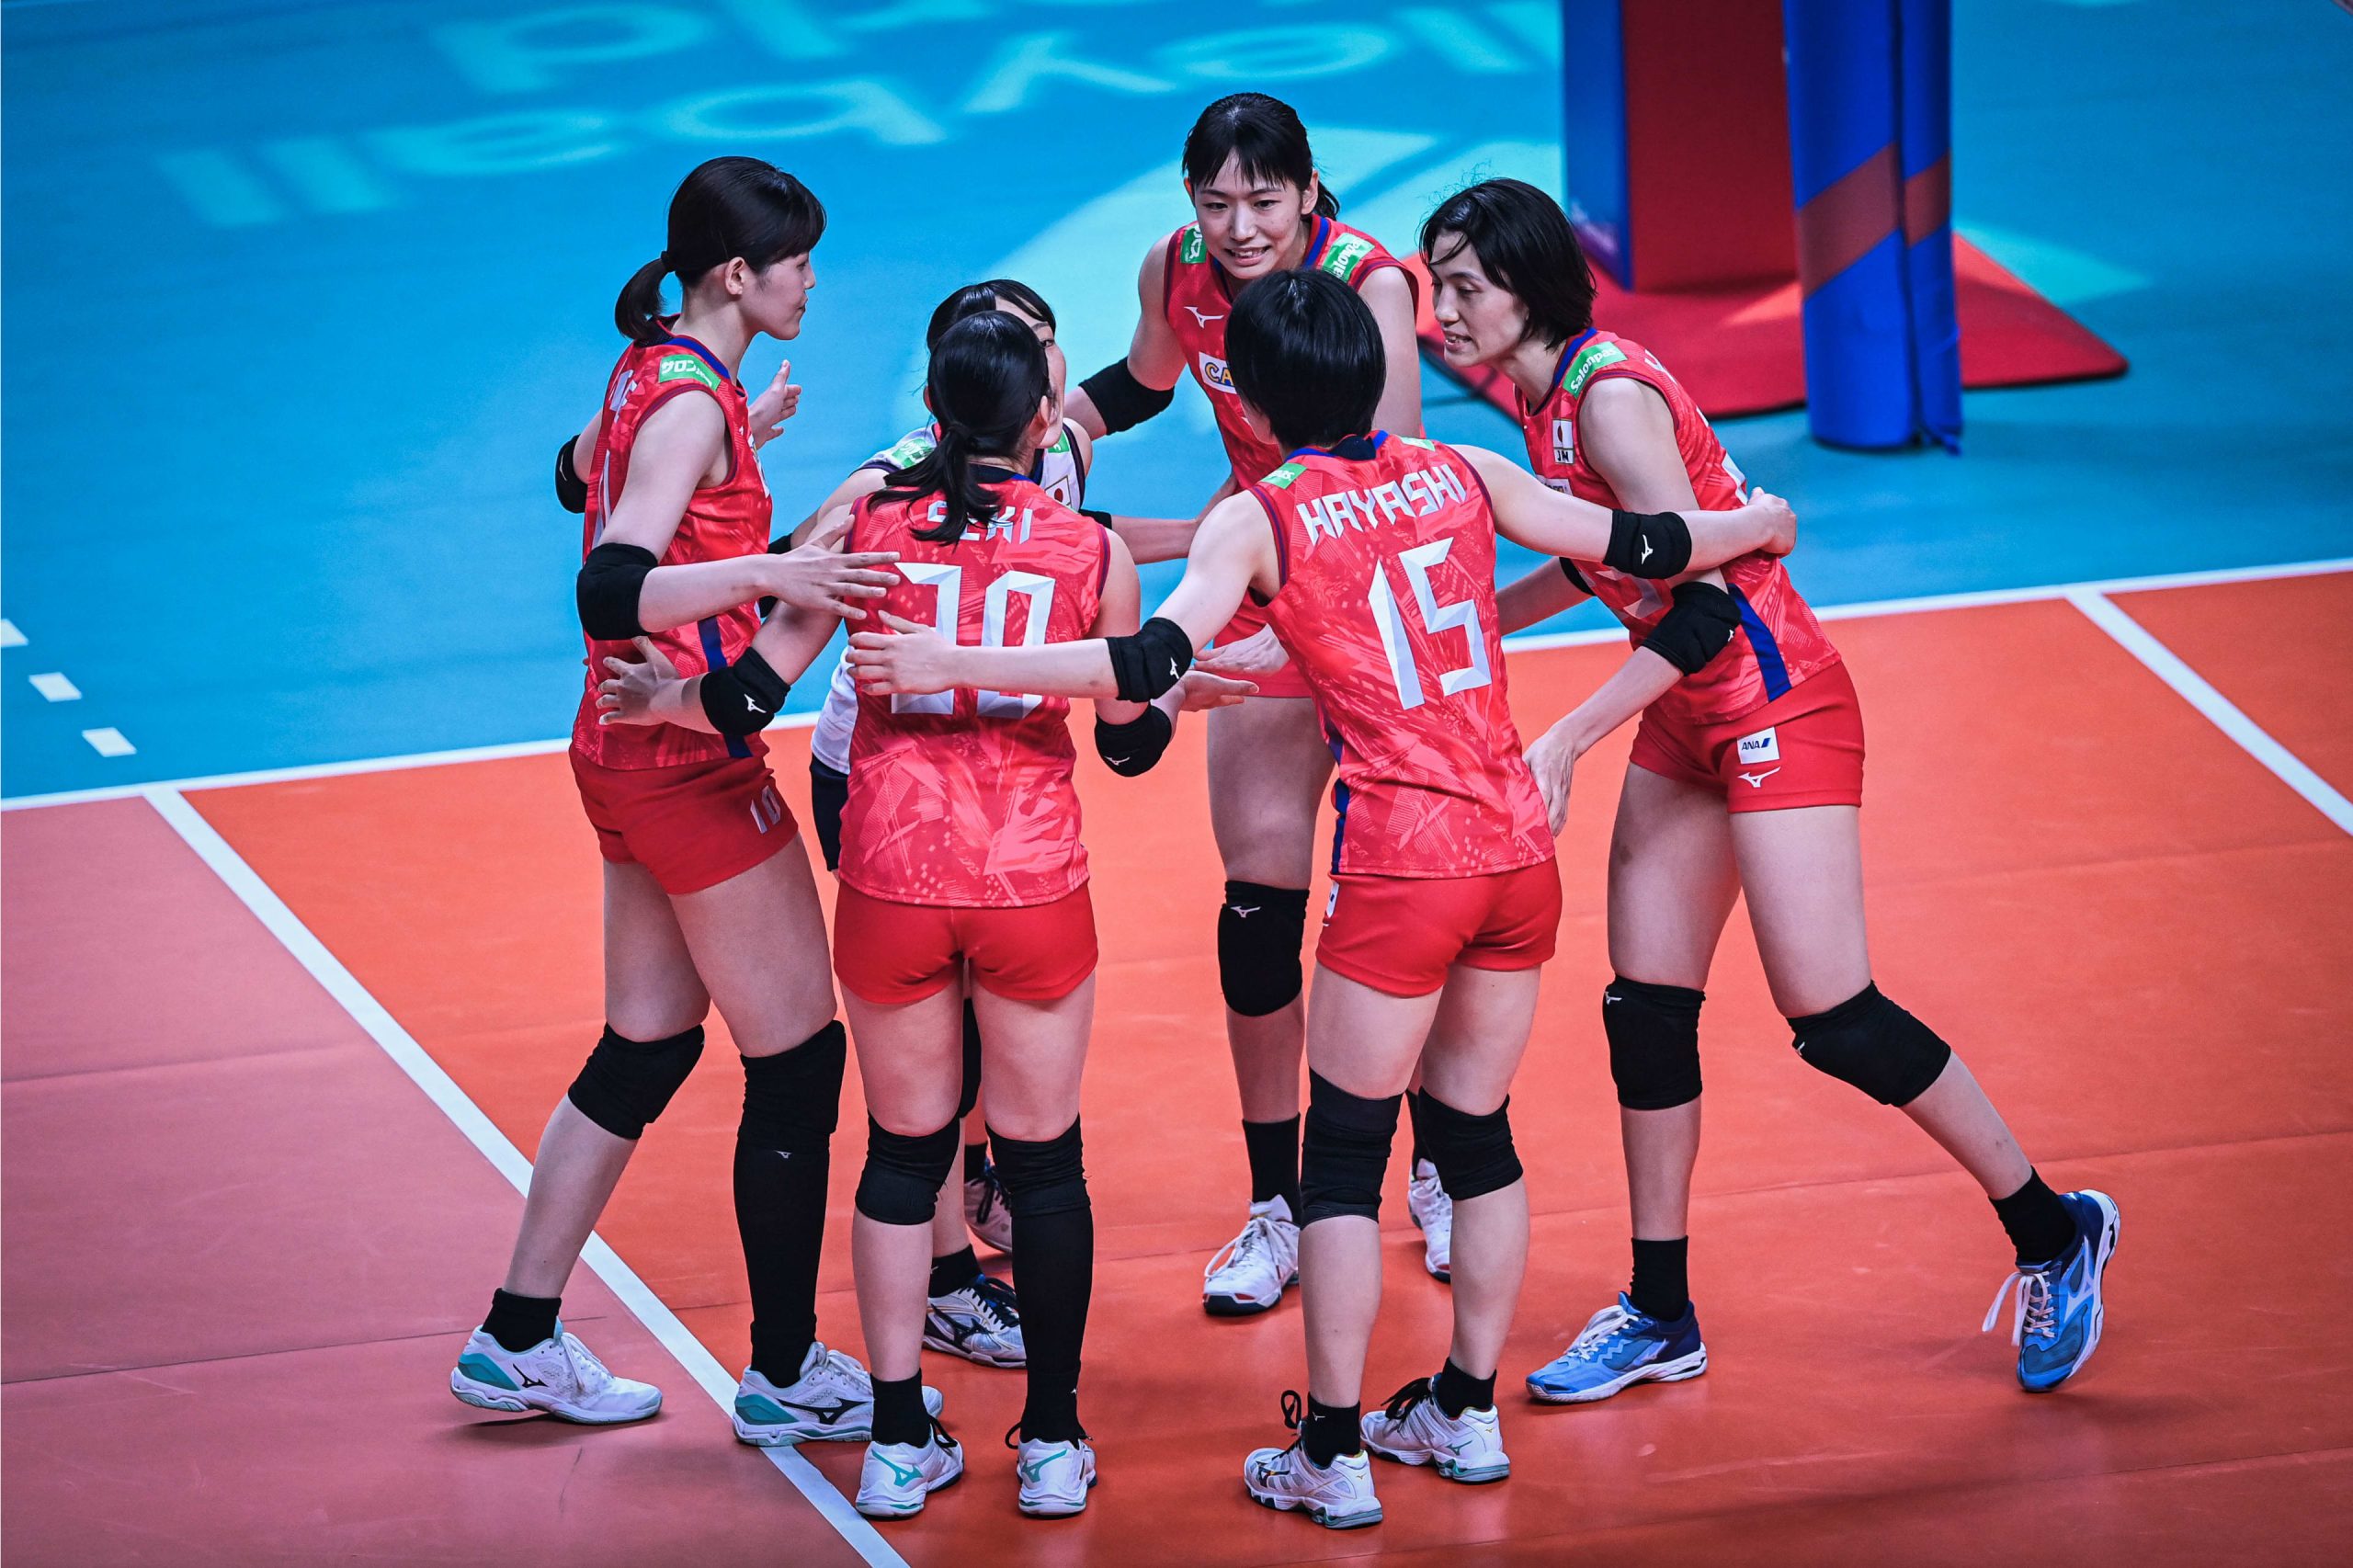 WorldofVolley VNL W Japan sweeps Thailand in duel of two most pleasant surprises of VNL 2022 to stay undefeated after 7 games